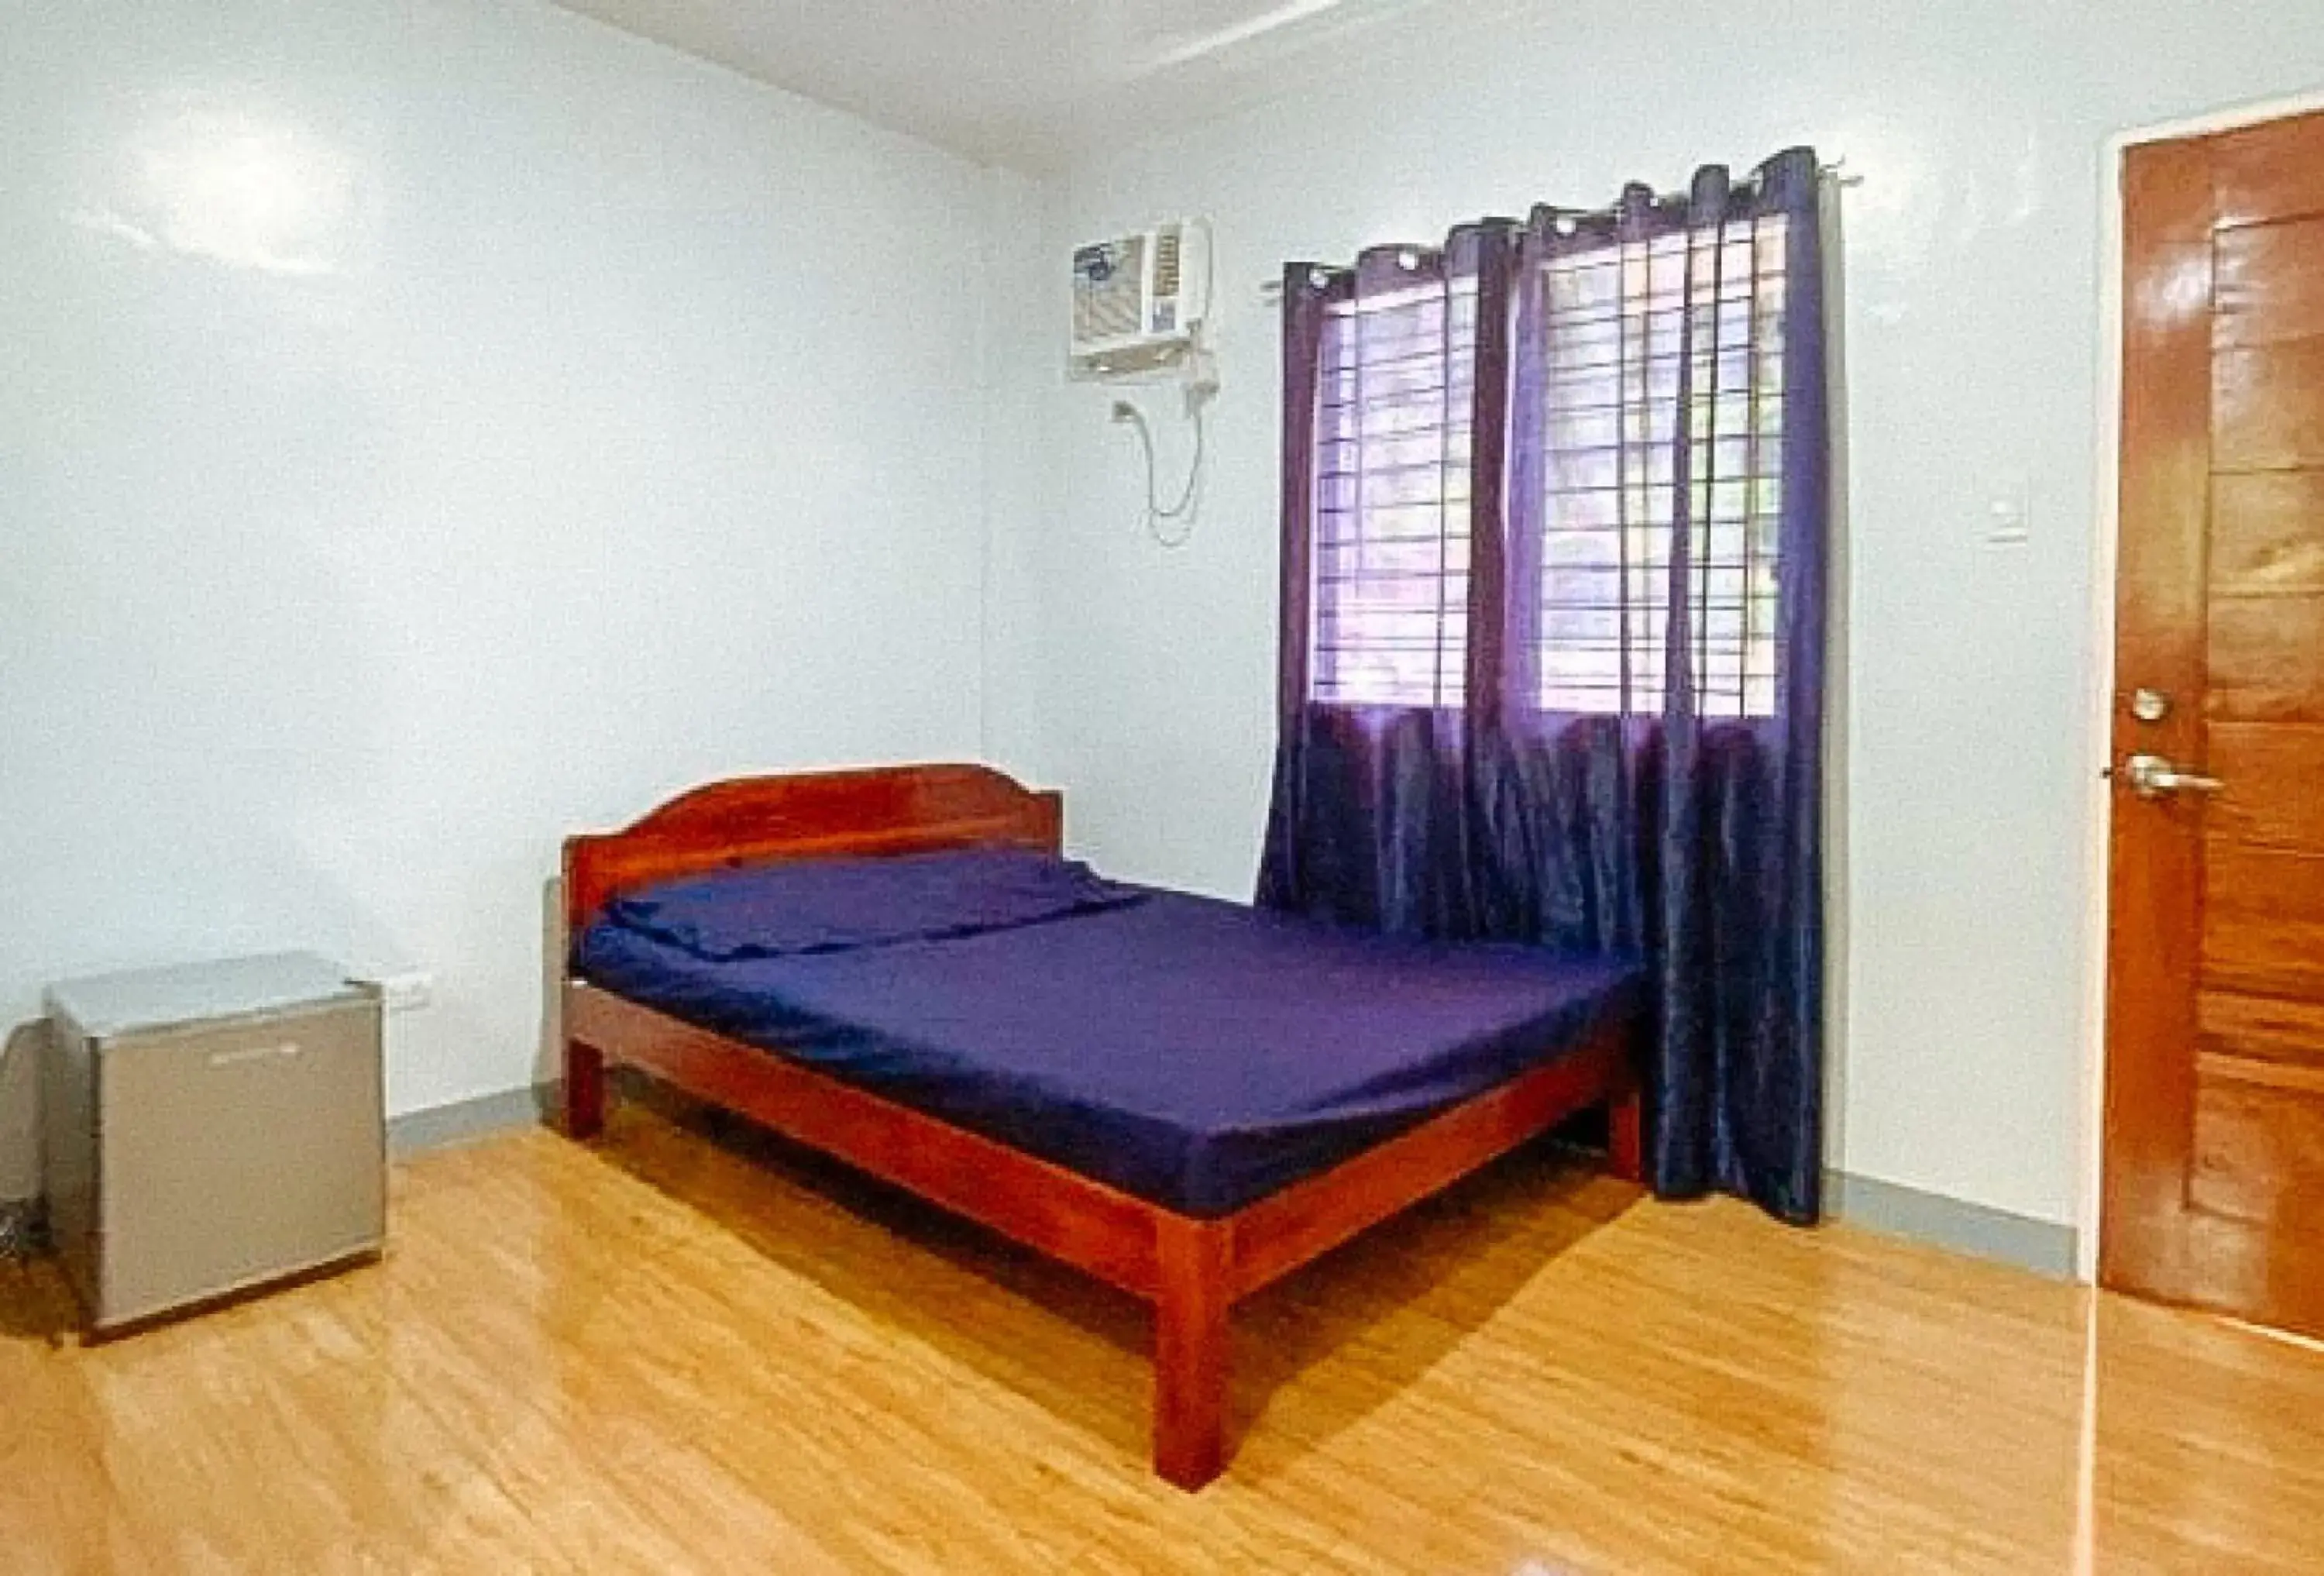 Bed in Irah's Guest House